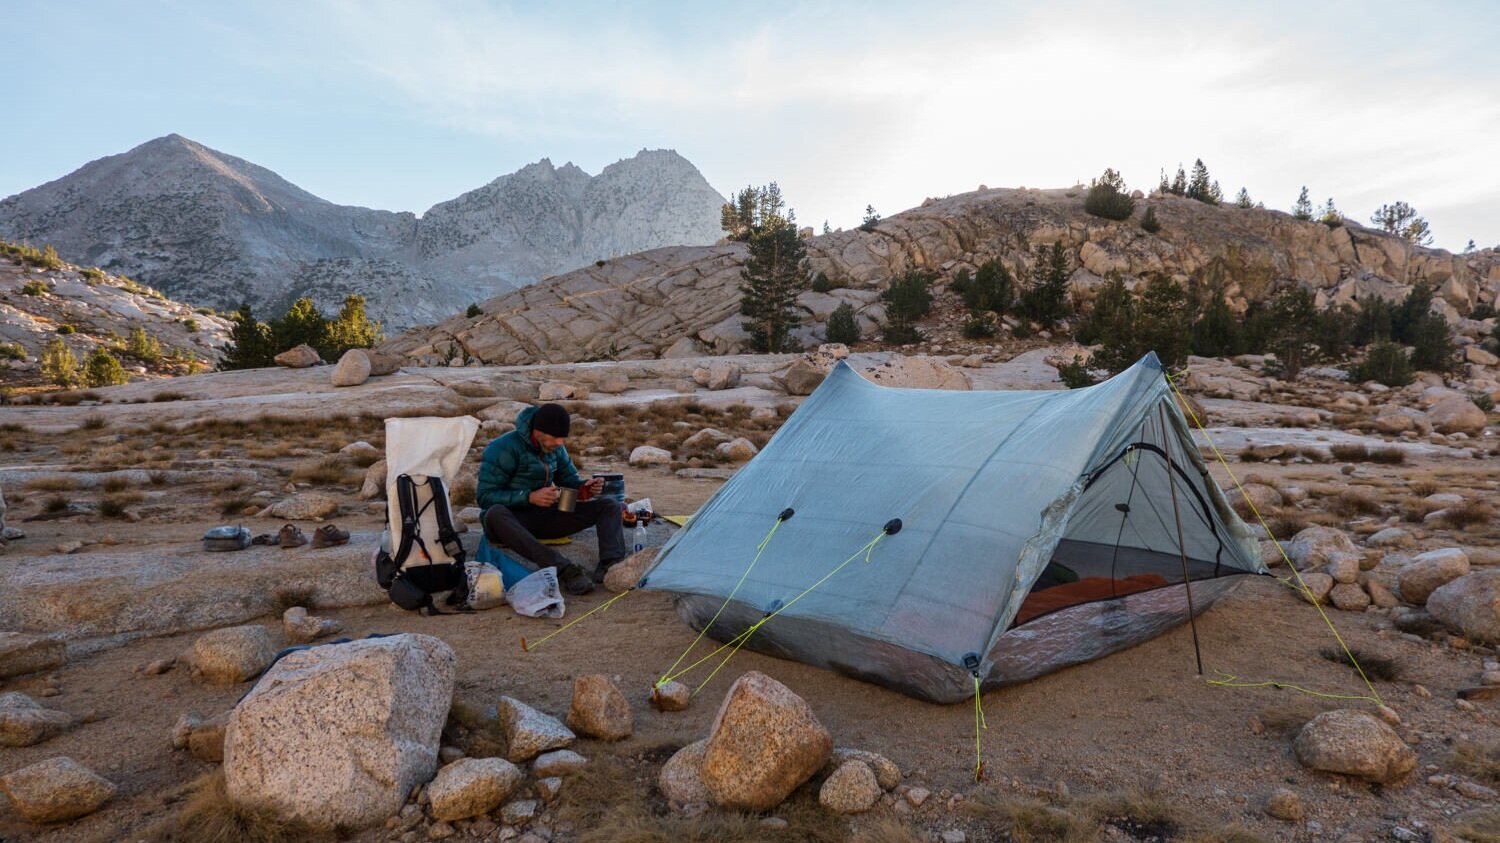 hiking the John Muir Trail with the  Hyperlite Mountain Gear Southwest 3400 backpack  and the  Zpacks Triplex Tent .